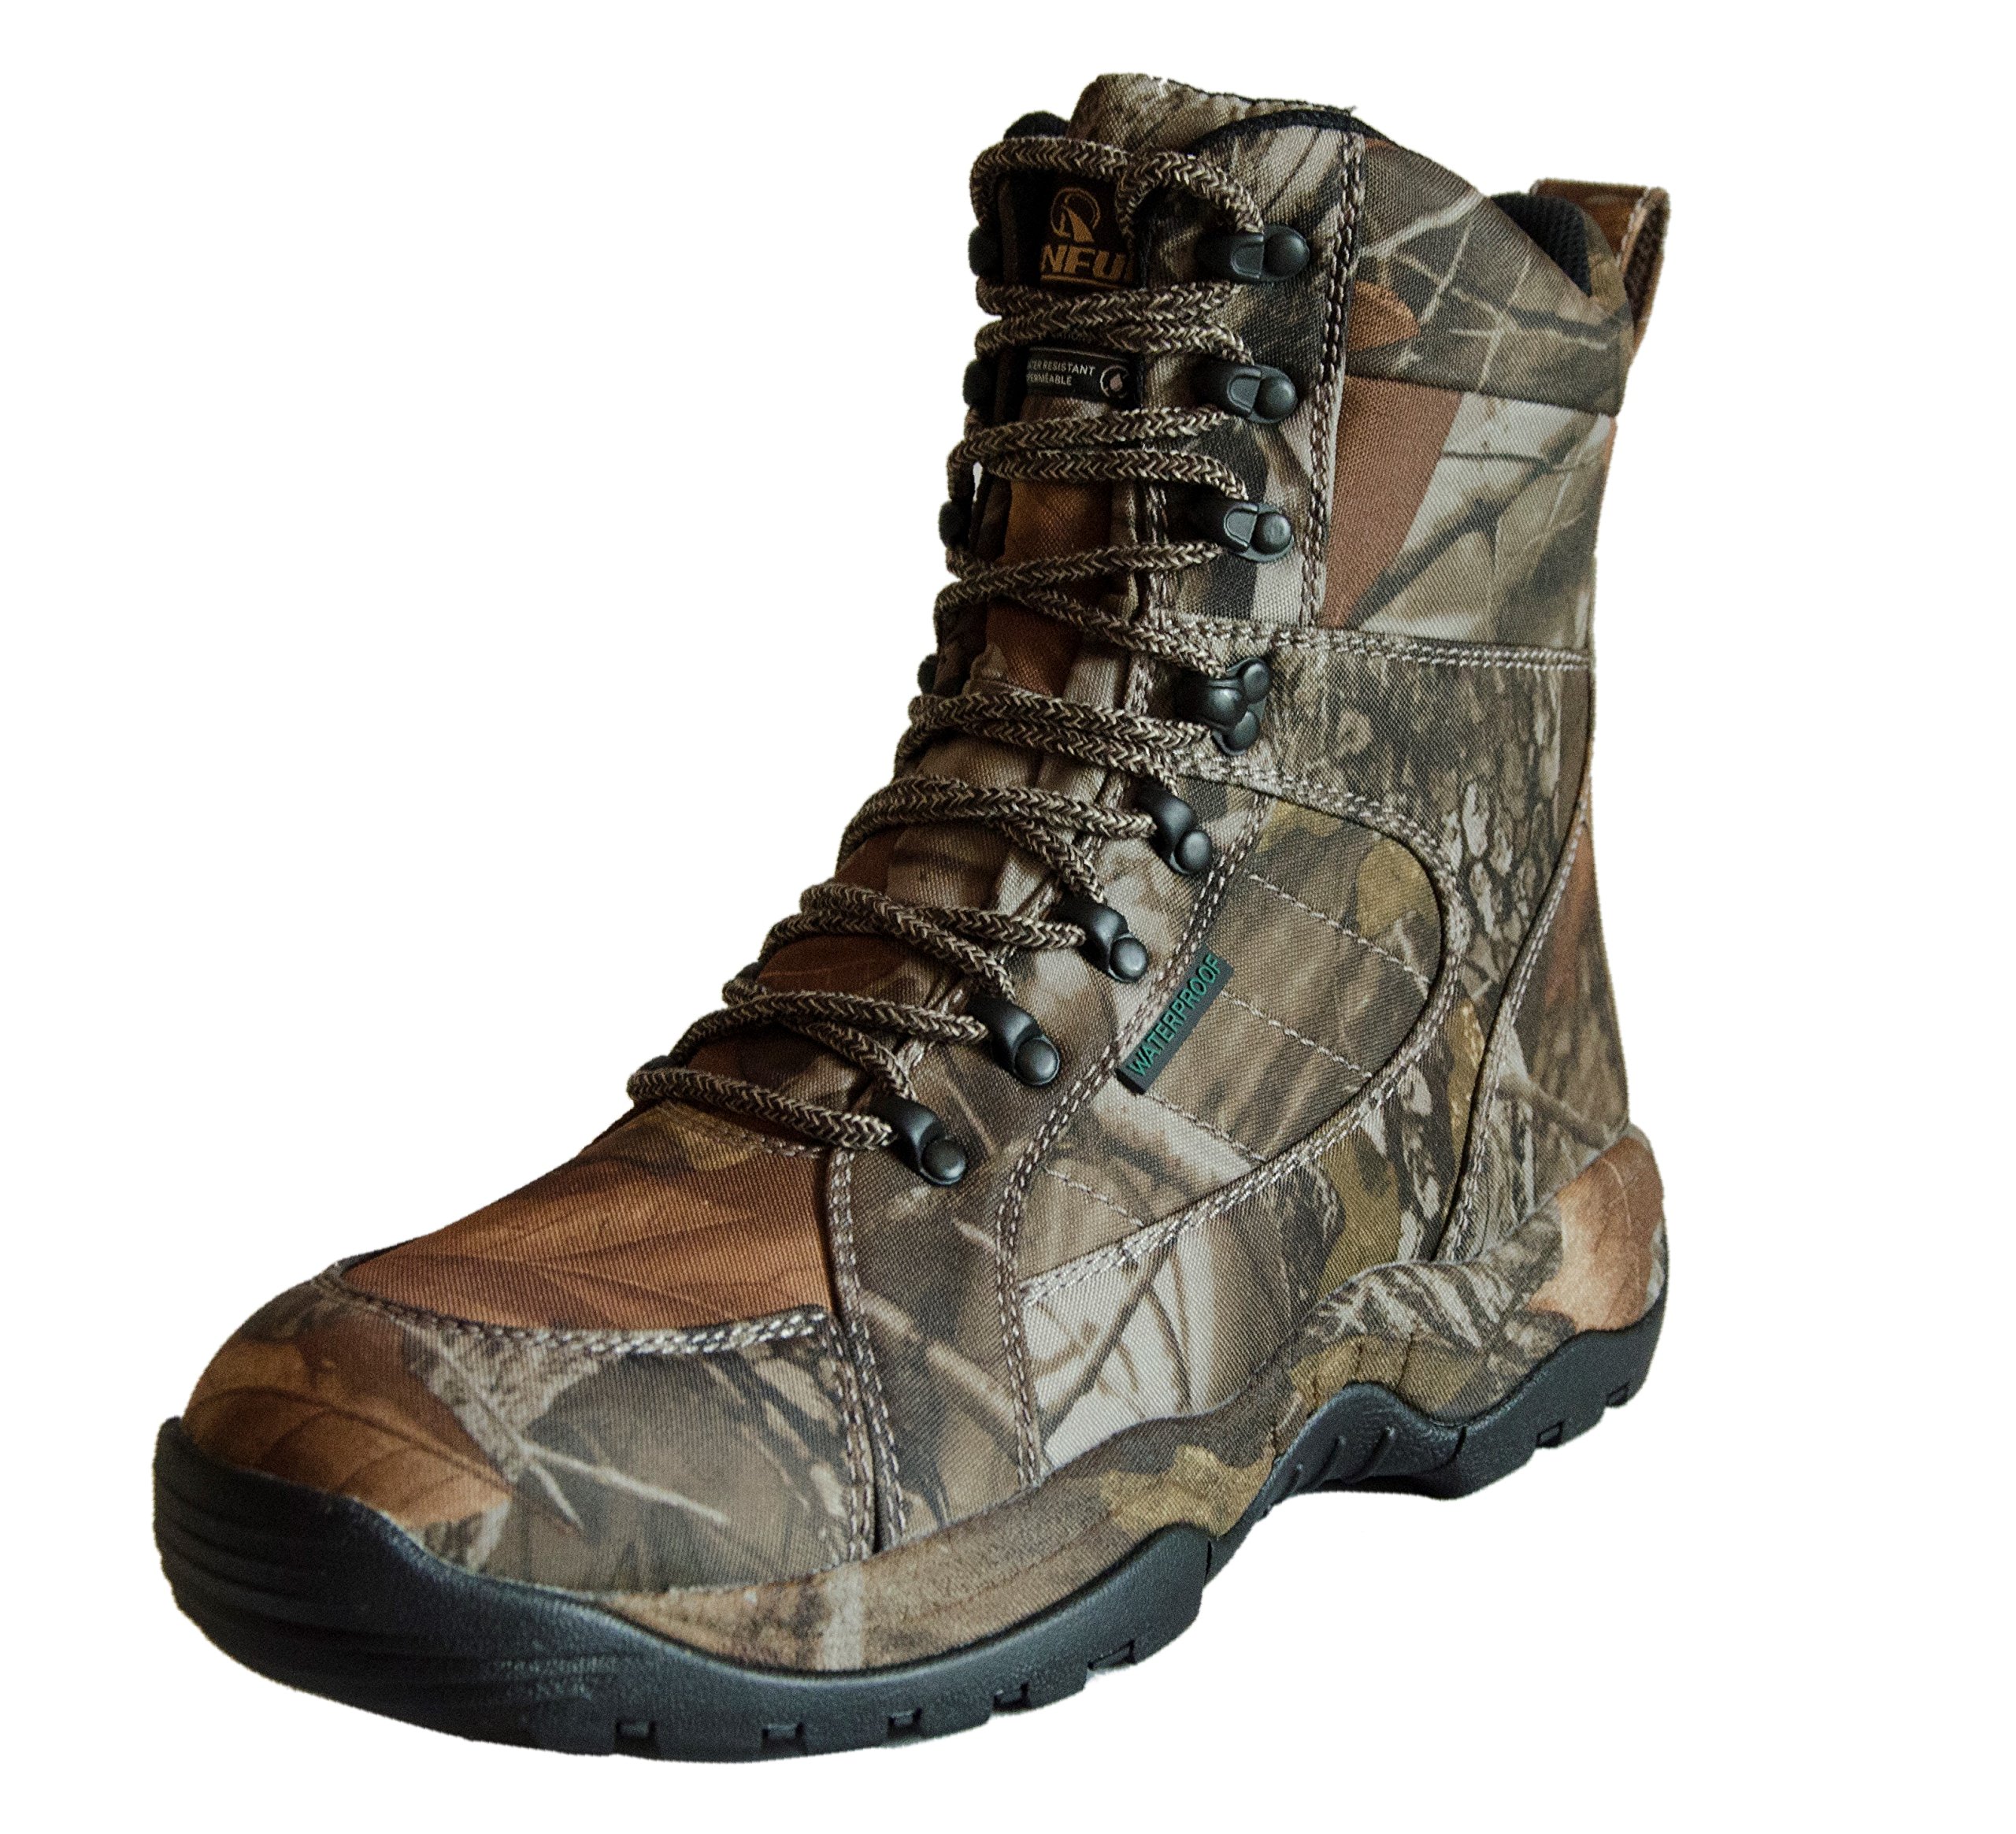 R RUNFUN Men's Lightweight Hunting Boots, Camo Waterproof Insulated Hunting Shoes, EVA Midsole Hiking Boots, Anti-slip and Durable for Outdoor Working Fishing Climbing Farming